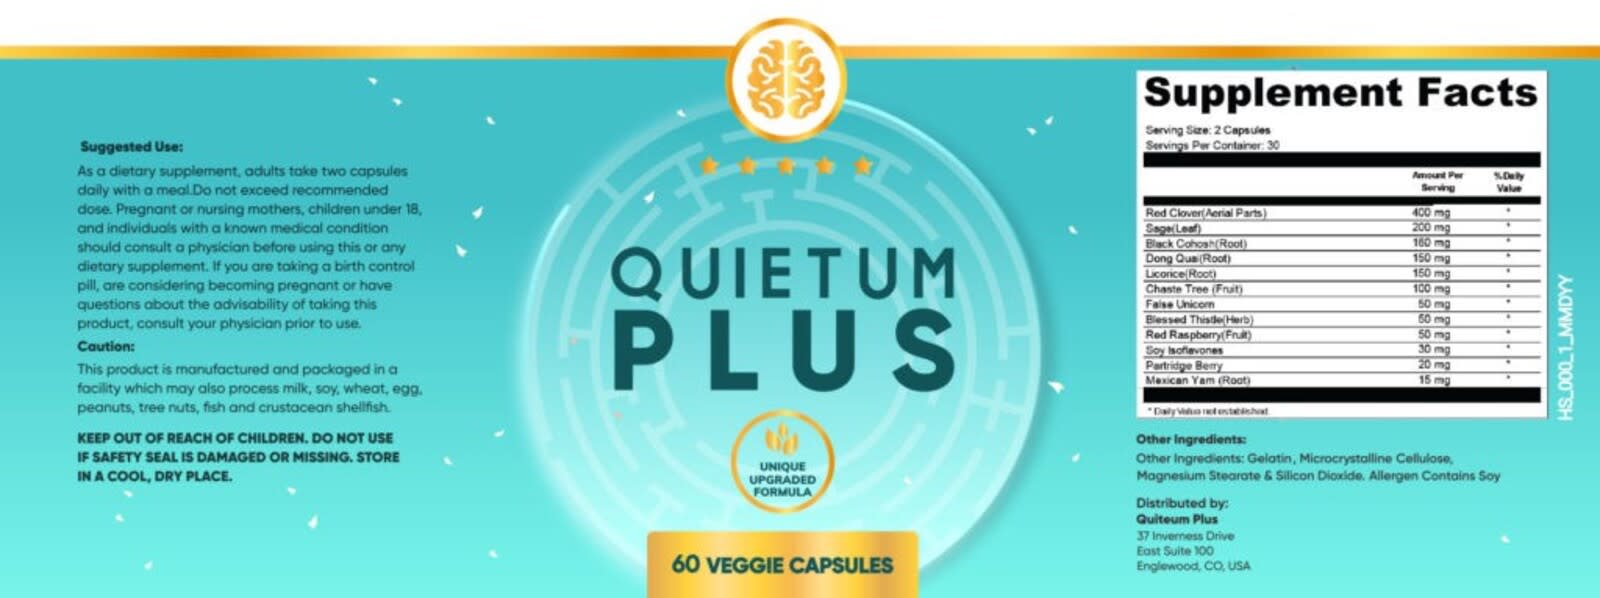 Quietum Plus Reviews: Is Quietum Plus Safe or Not? Any Side effects? by ...